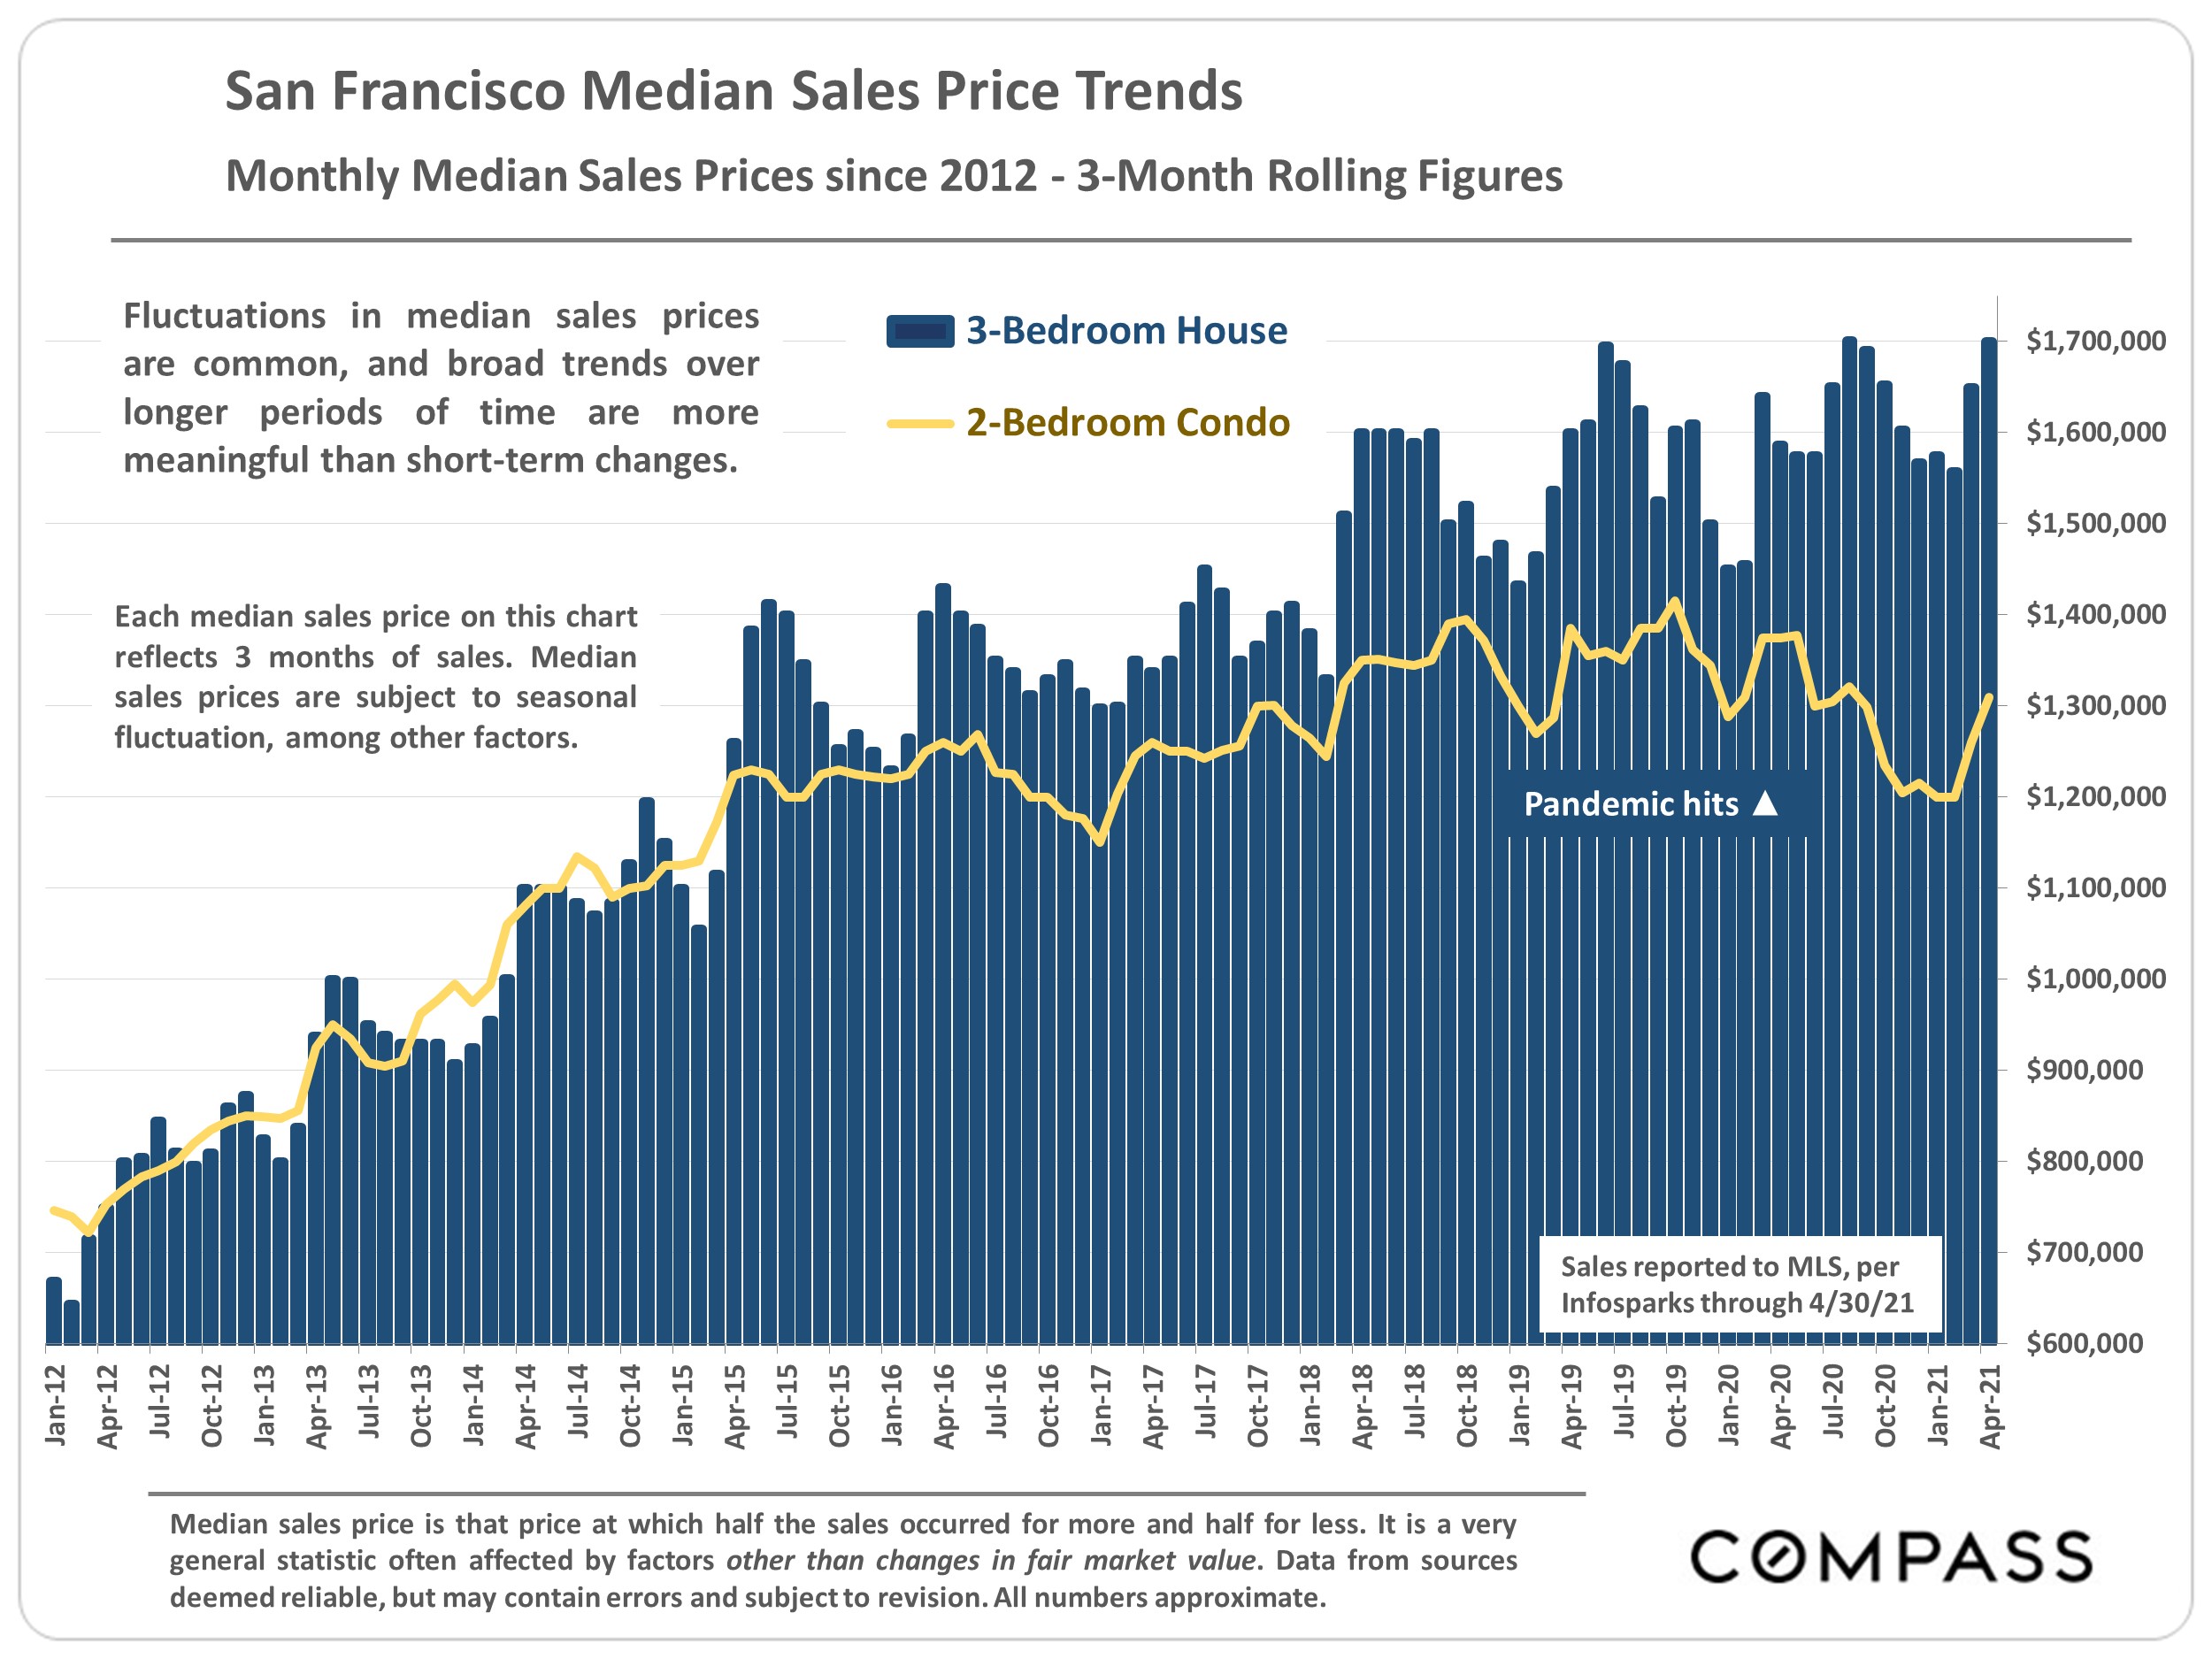 Chart showing the San Francisco Median sales Price Trends, Monthly Median Sales price since 2012, 3-month rolling figures